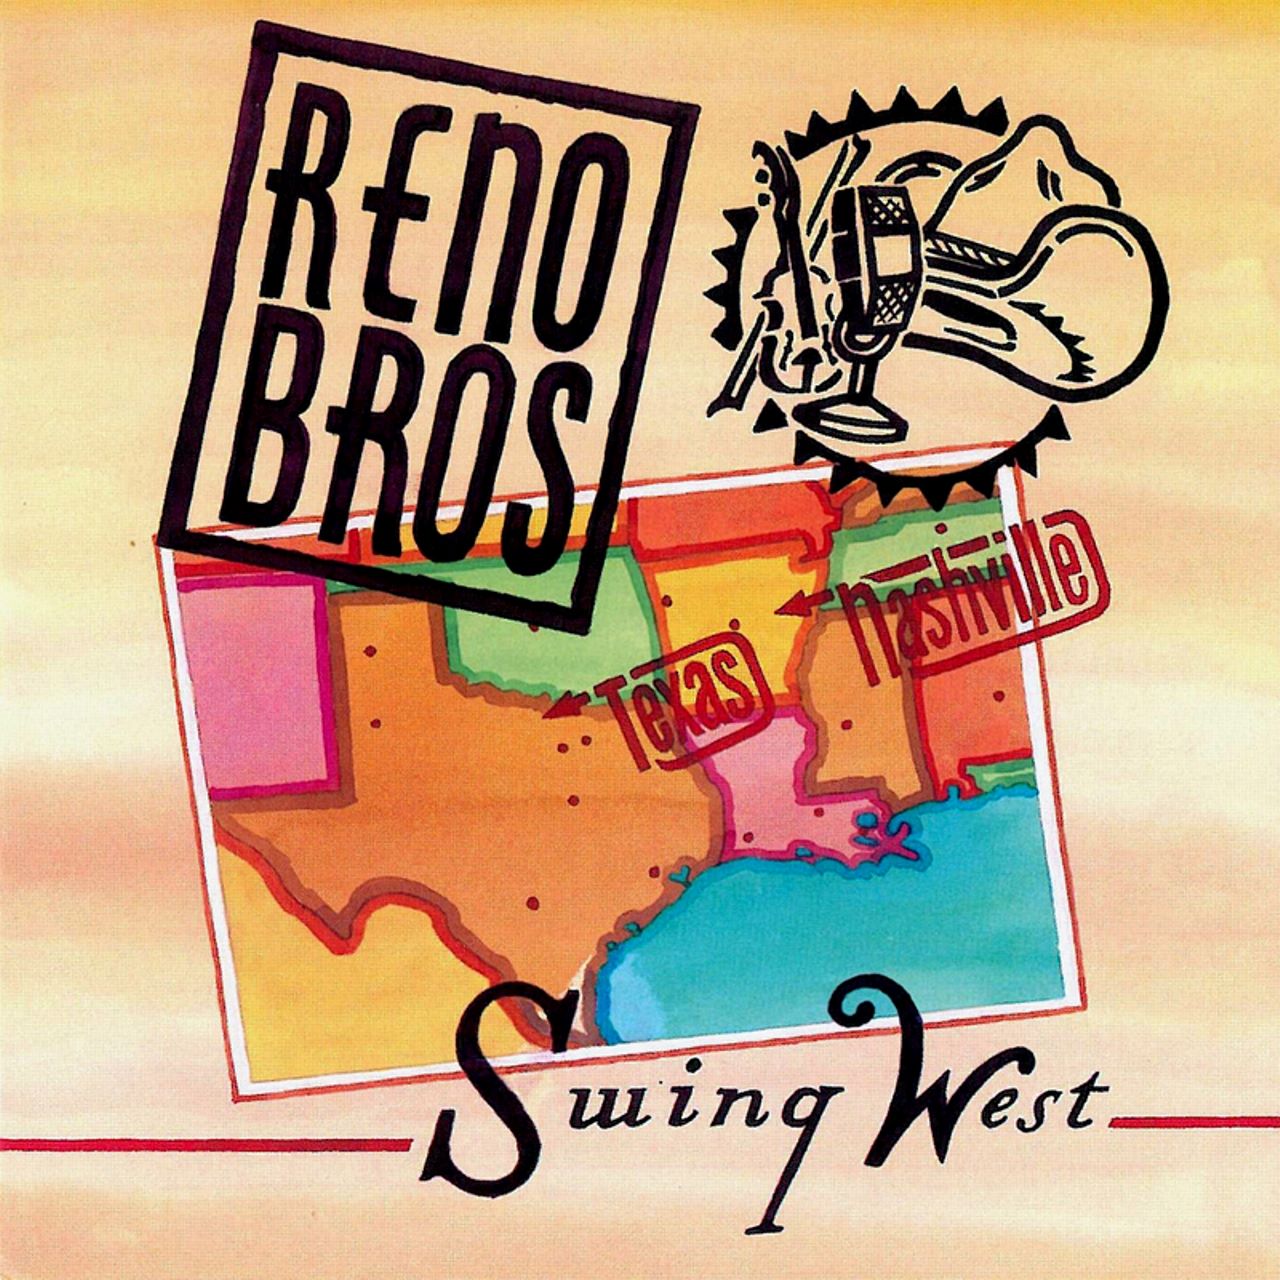 Reno Brothers - Swing West cover album